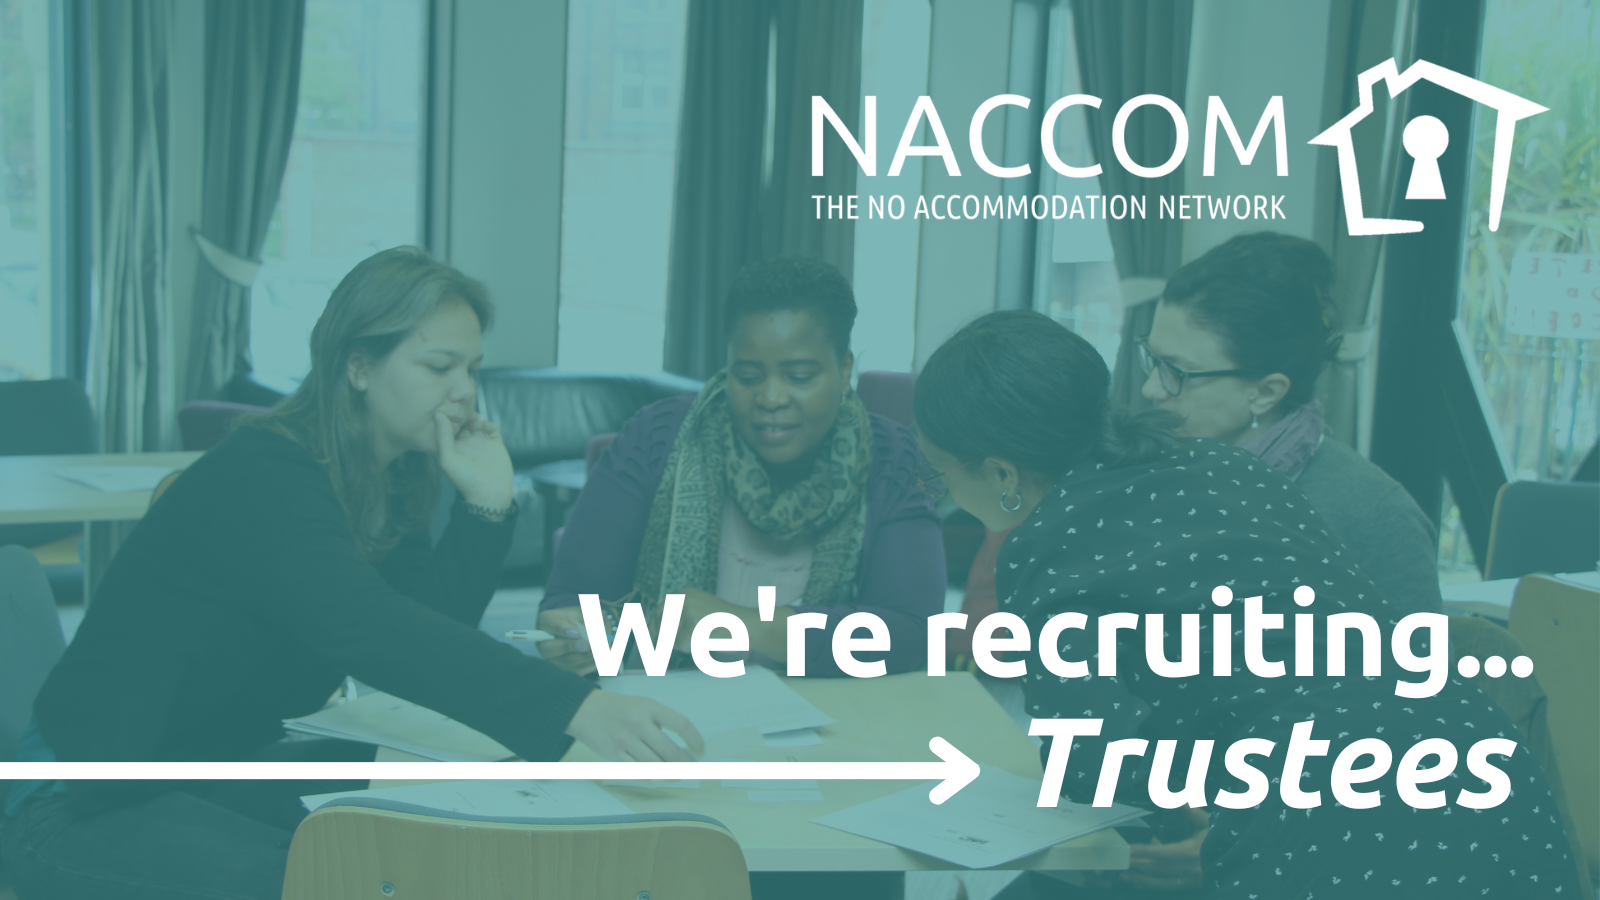 We're recruiting Trustees! Could you support our mission to end destitution?